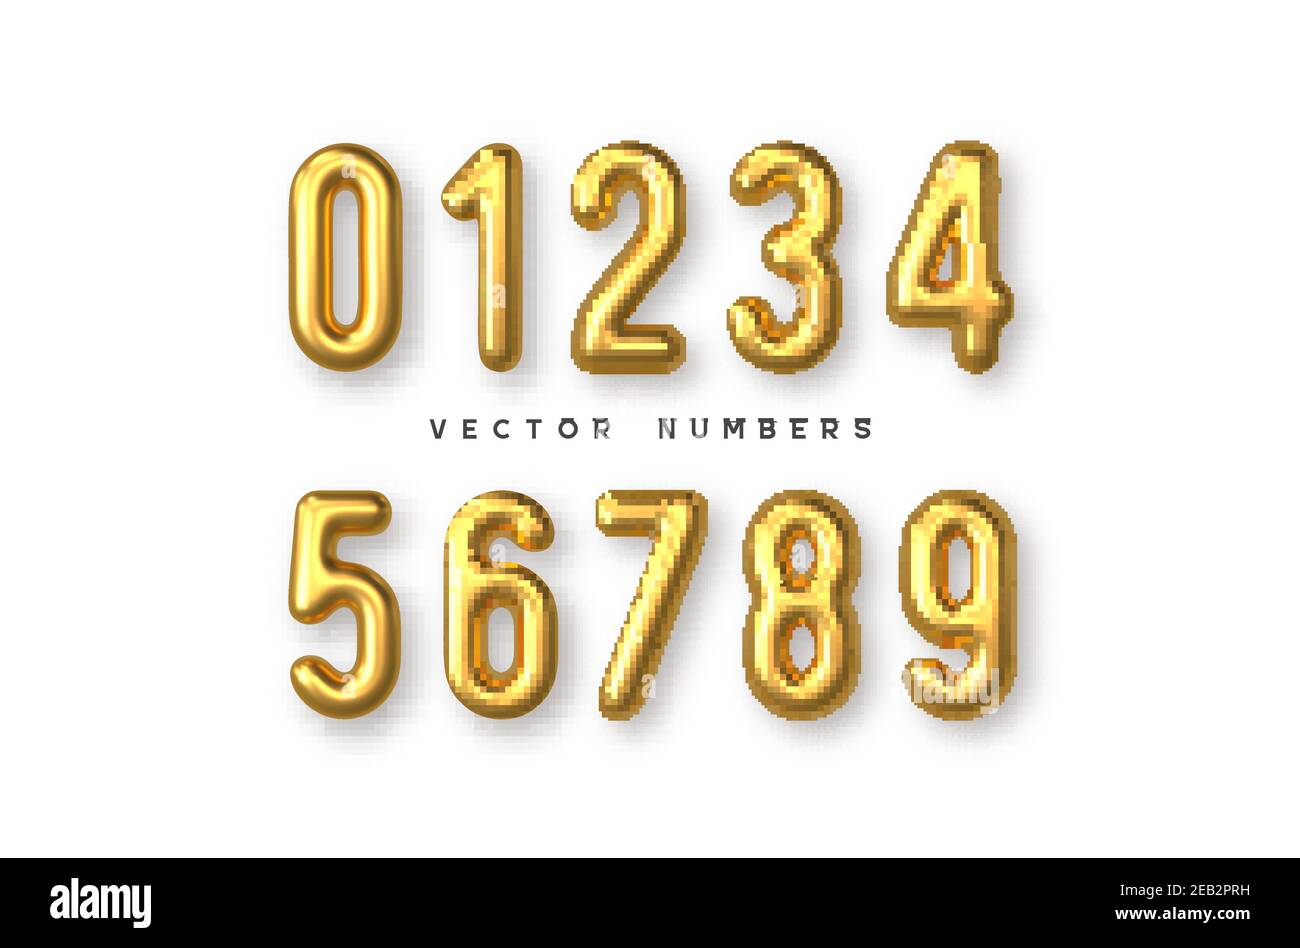 Free Vector  Golden numbers set 3d realistic metal golden font number  1234567890 decoration for banner cover birthday or anniversary party  invitation design